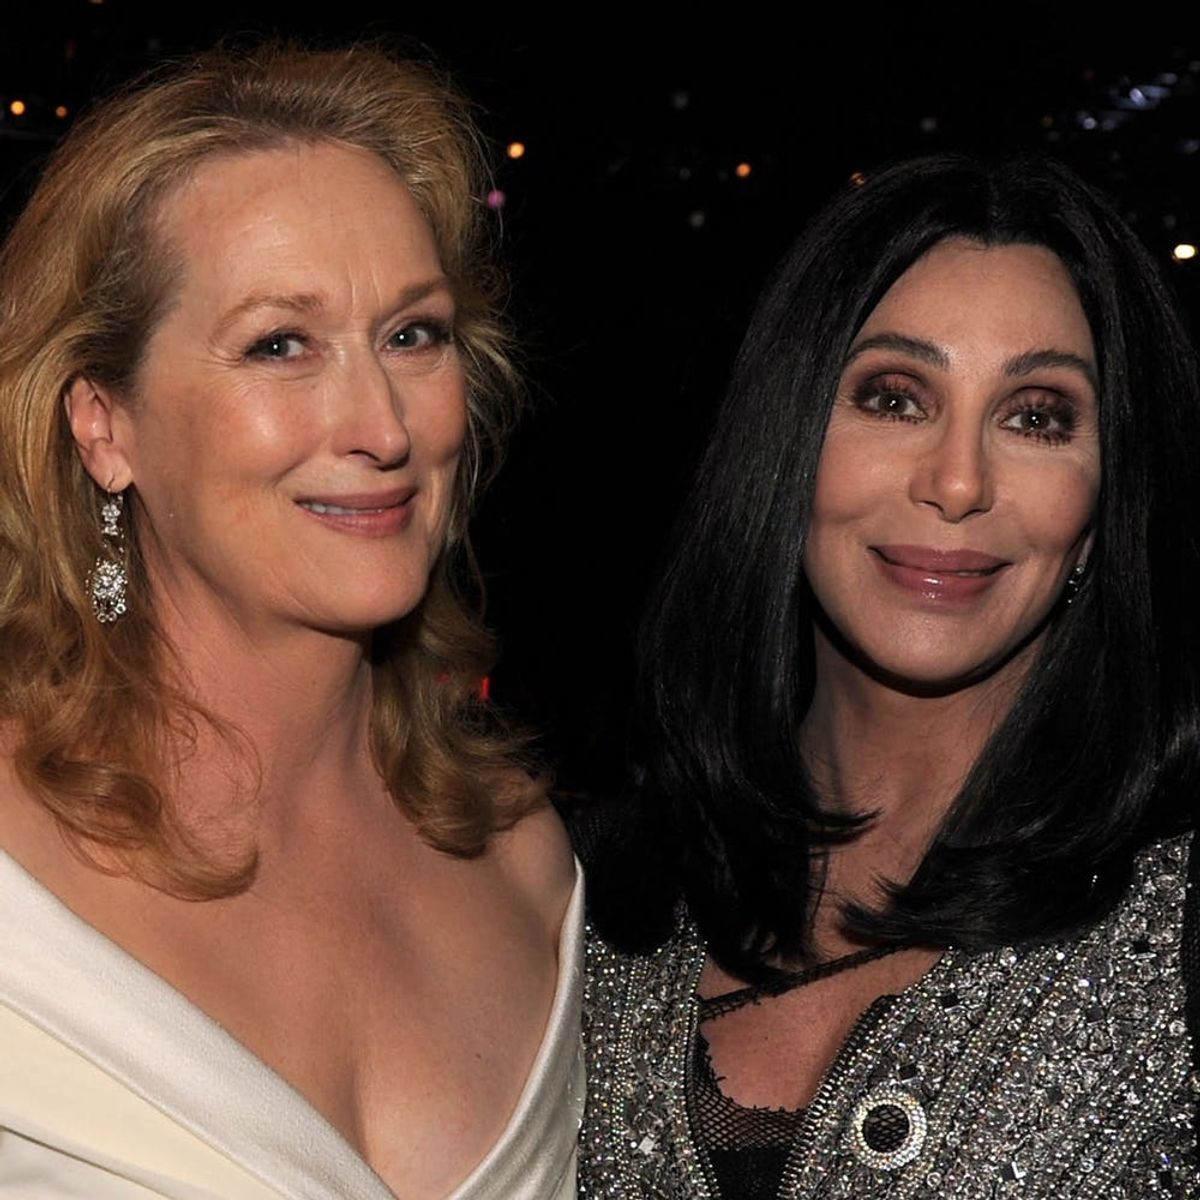 Meryl Streep Reveals She and Cher Once Took Down a Mugger Together